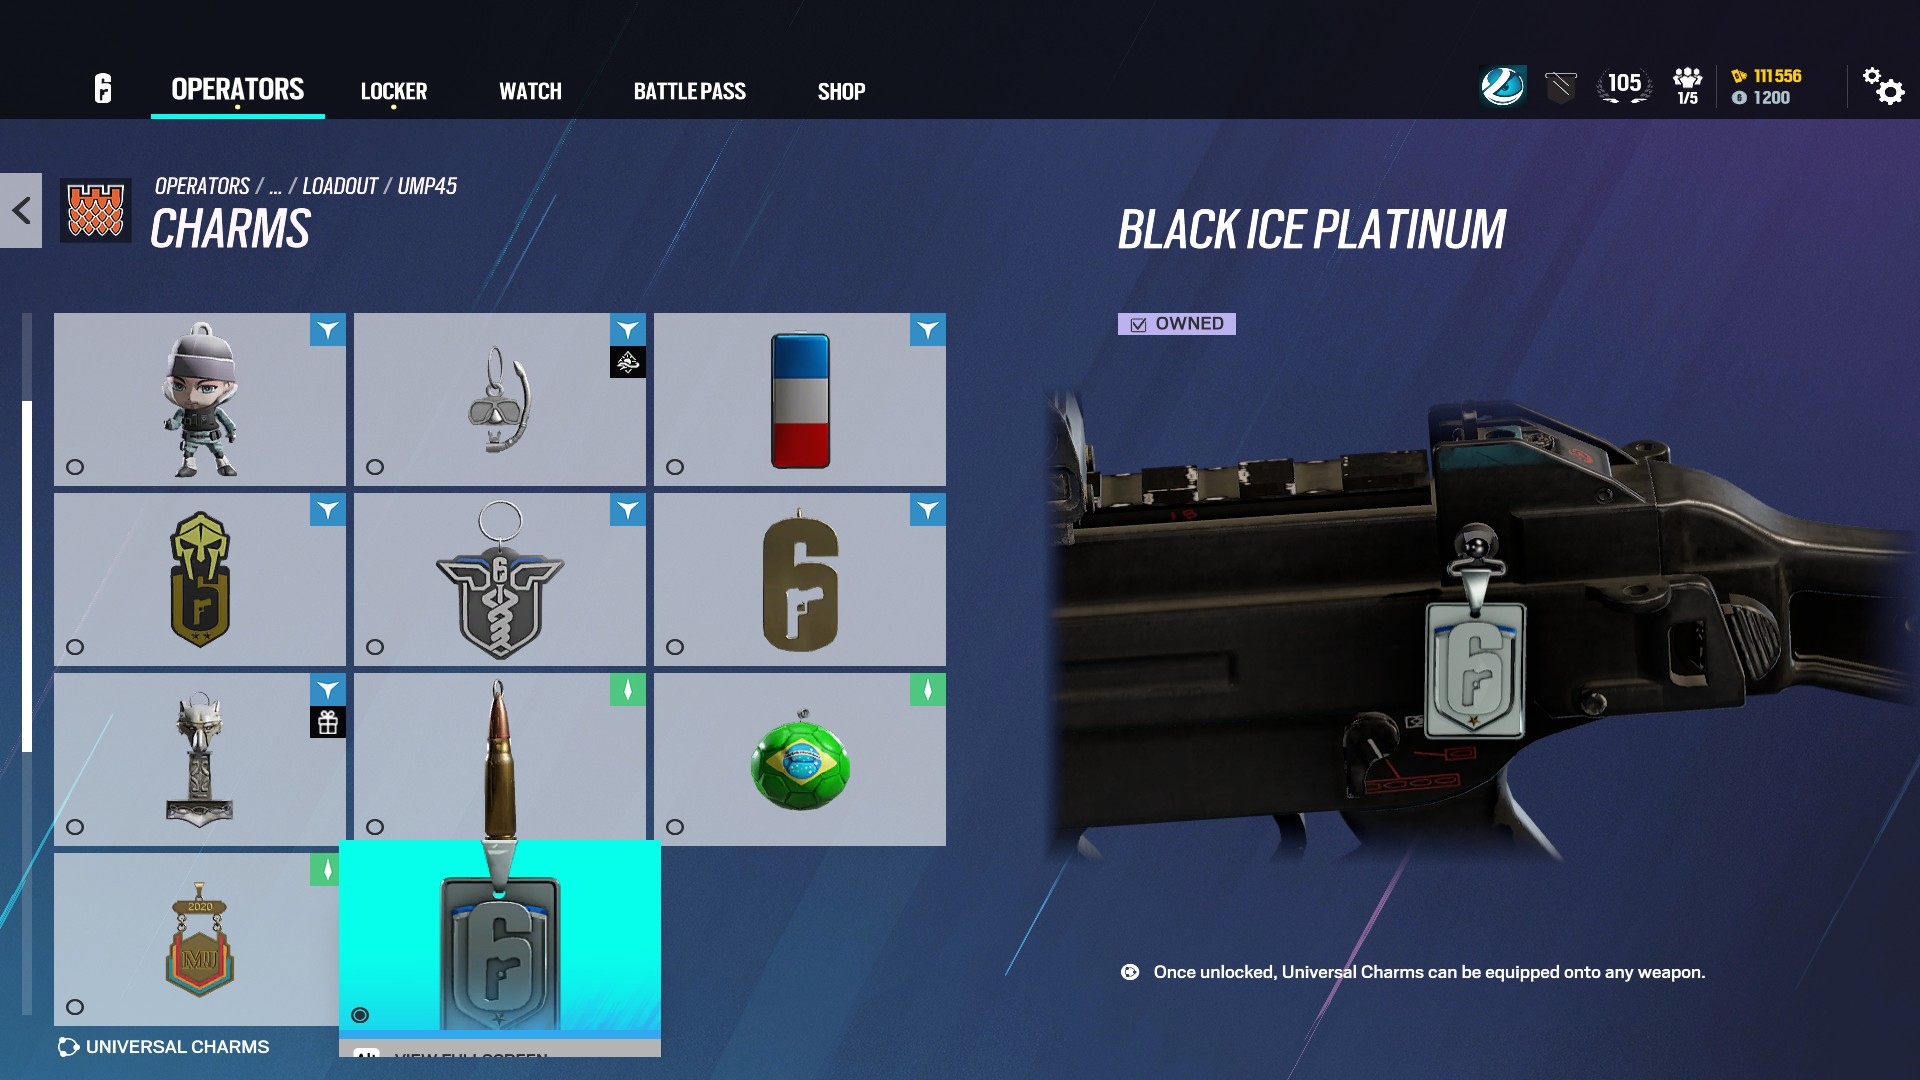 [STEAM] [Full Mail Access] Level 105 #1.2k R6 creds & 111.5k Renown#2015 R6 Account # Black Ice plat charm#OG year 1 skins:Fire,Ralphie,Peacock